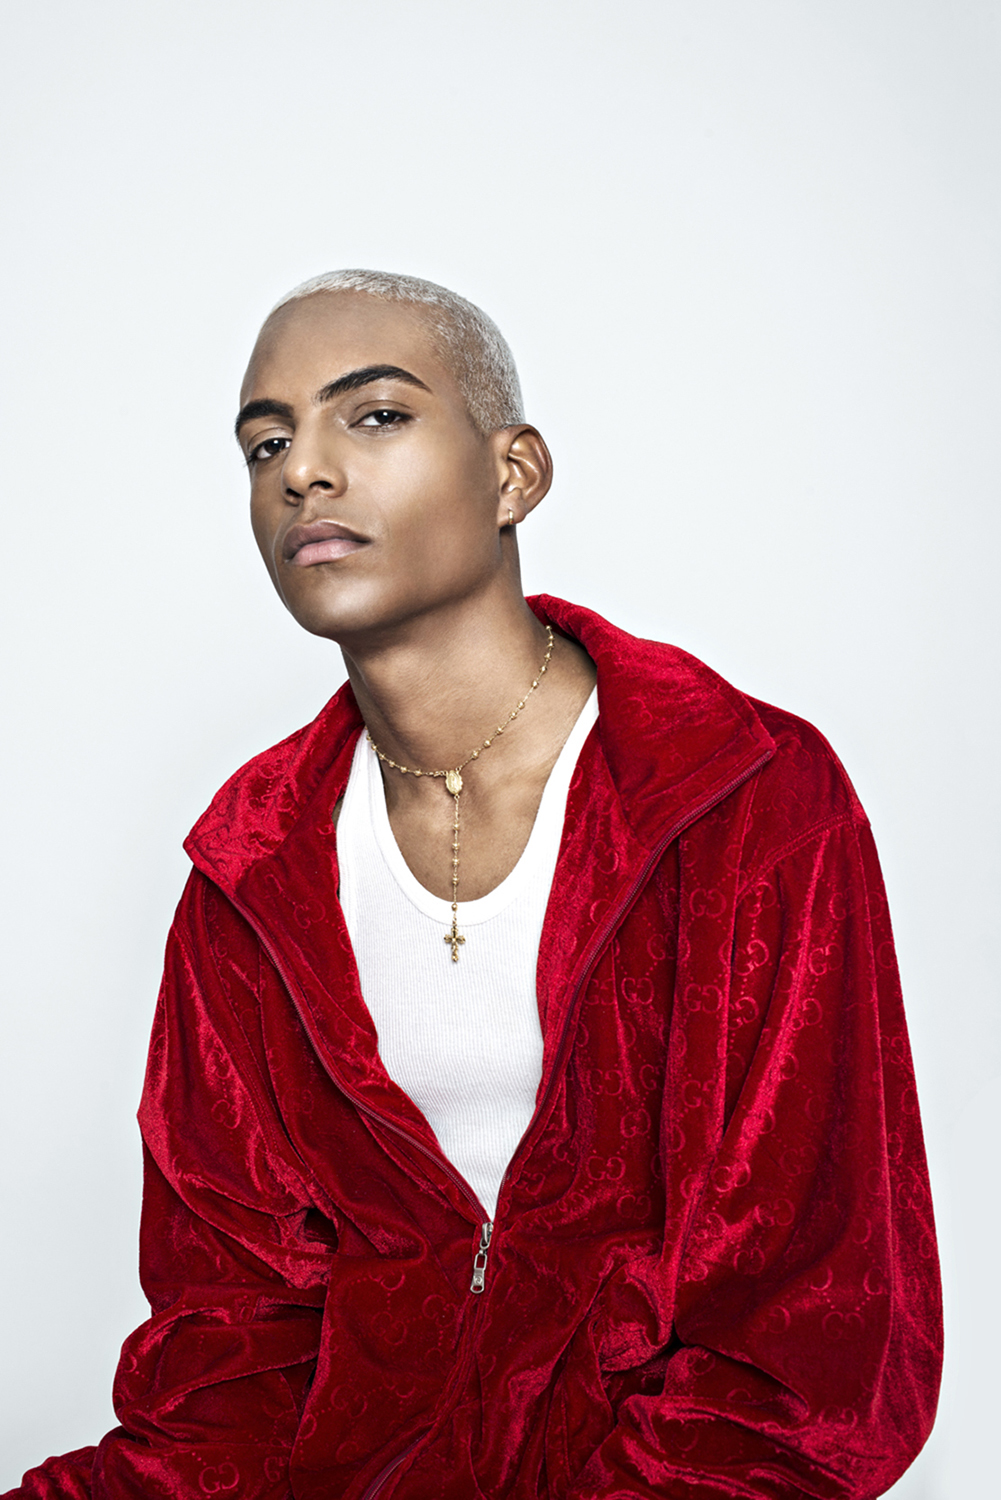 Deandre Peoples photographed by Aviva Klein - copyright 2021